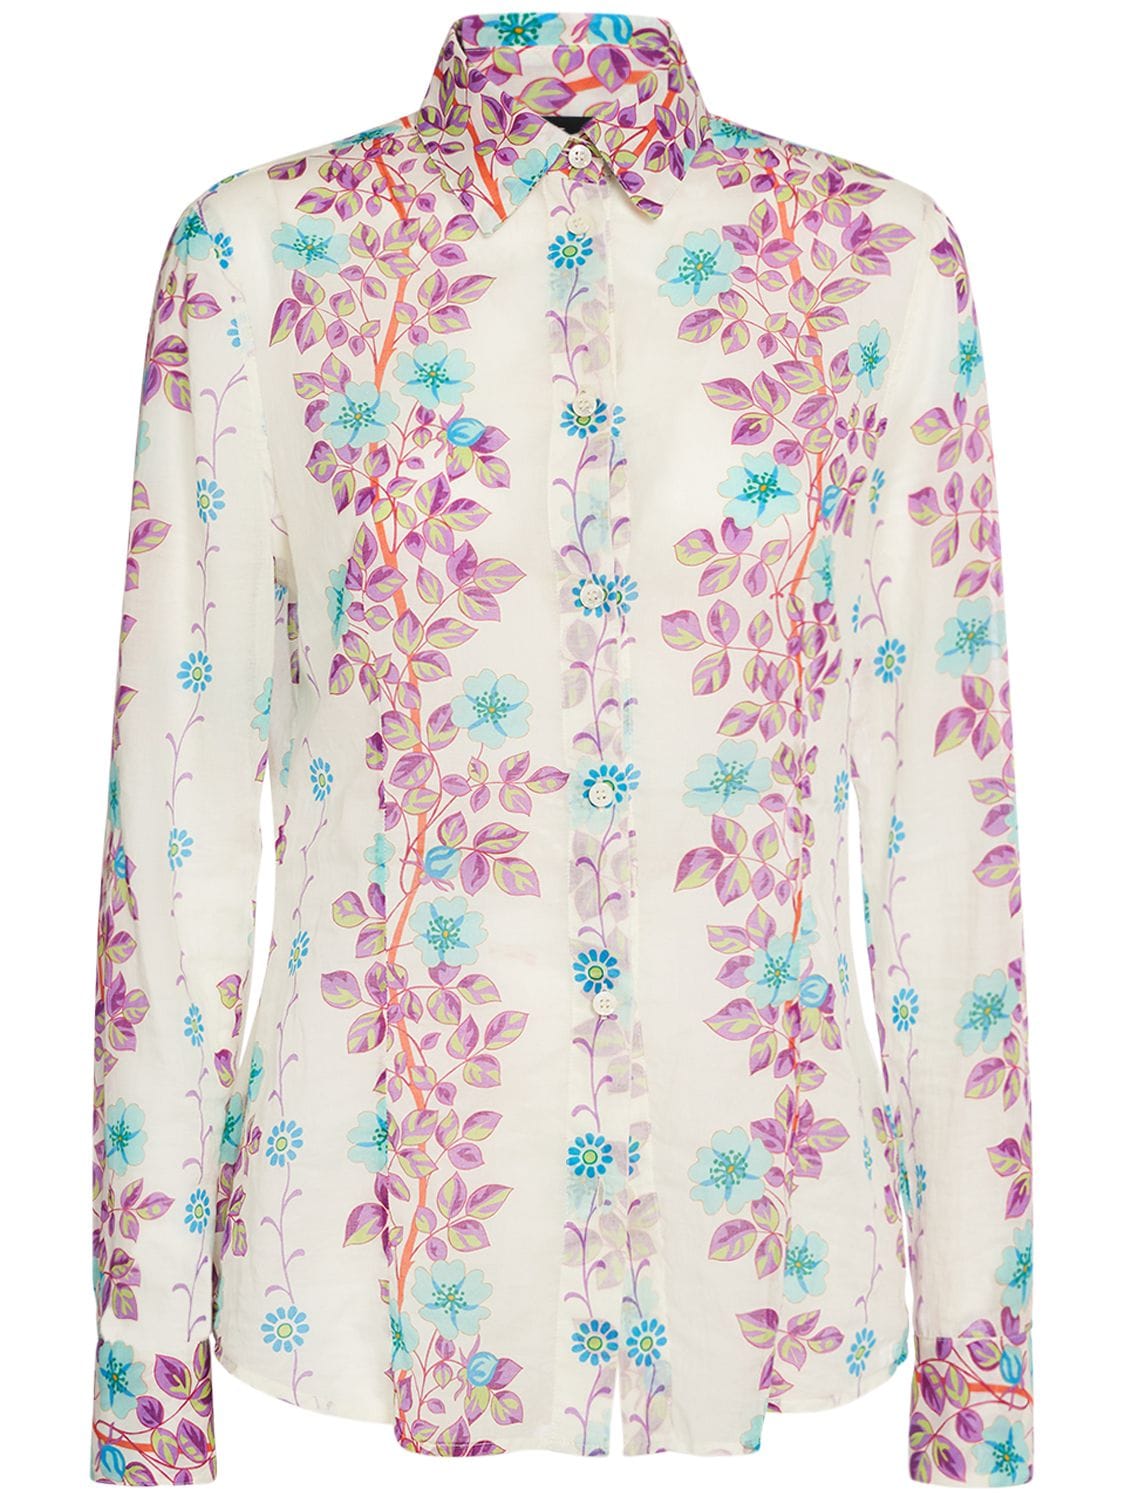 Image of Floral Printed Cotton Long Sleeve Shirt